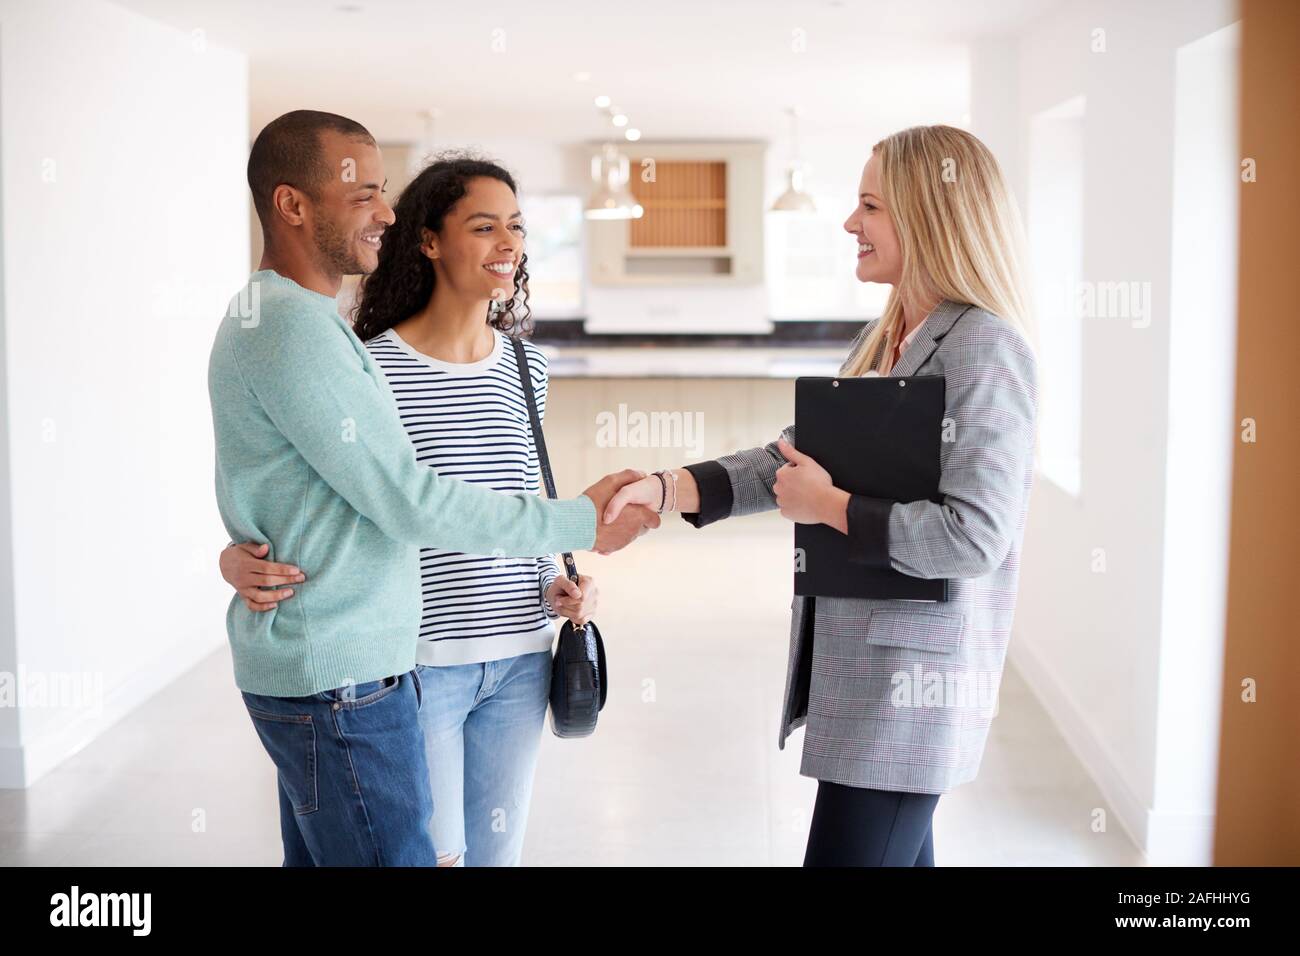 Female Realtor Shaking Hands With Couple Interested In Buying House Stock Photo